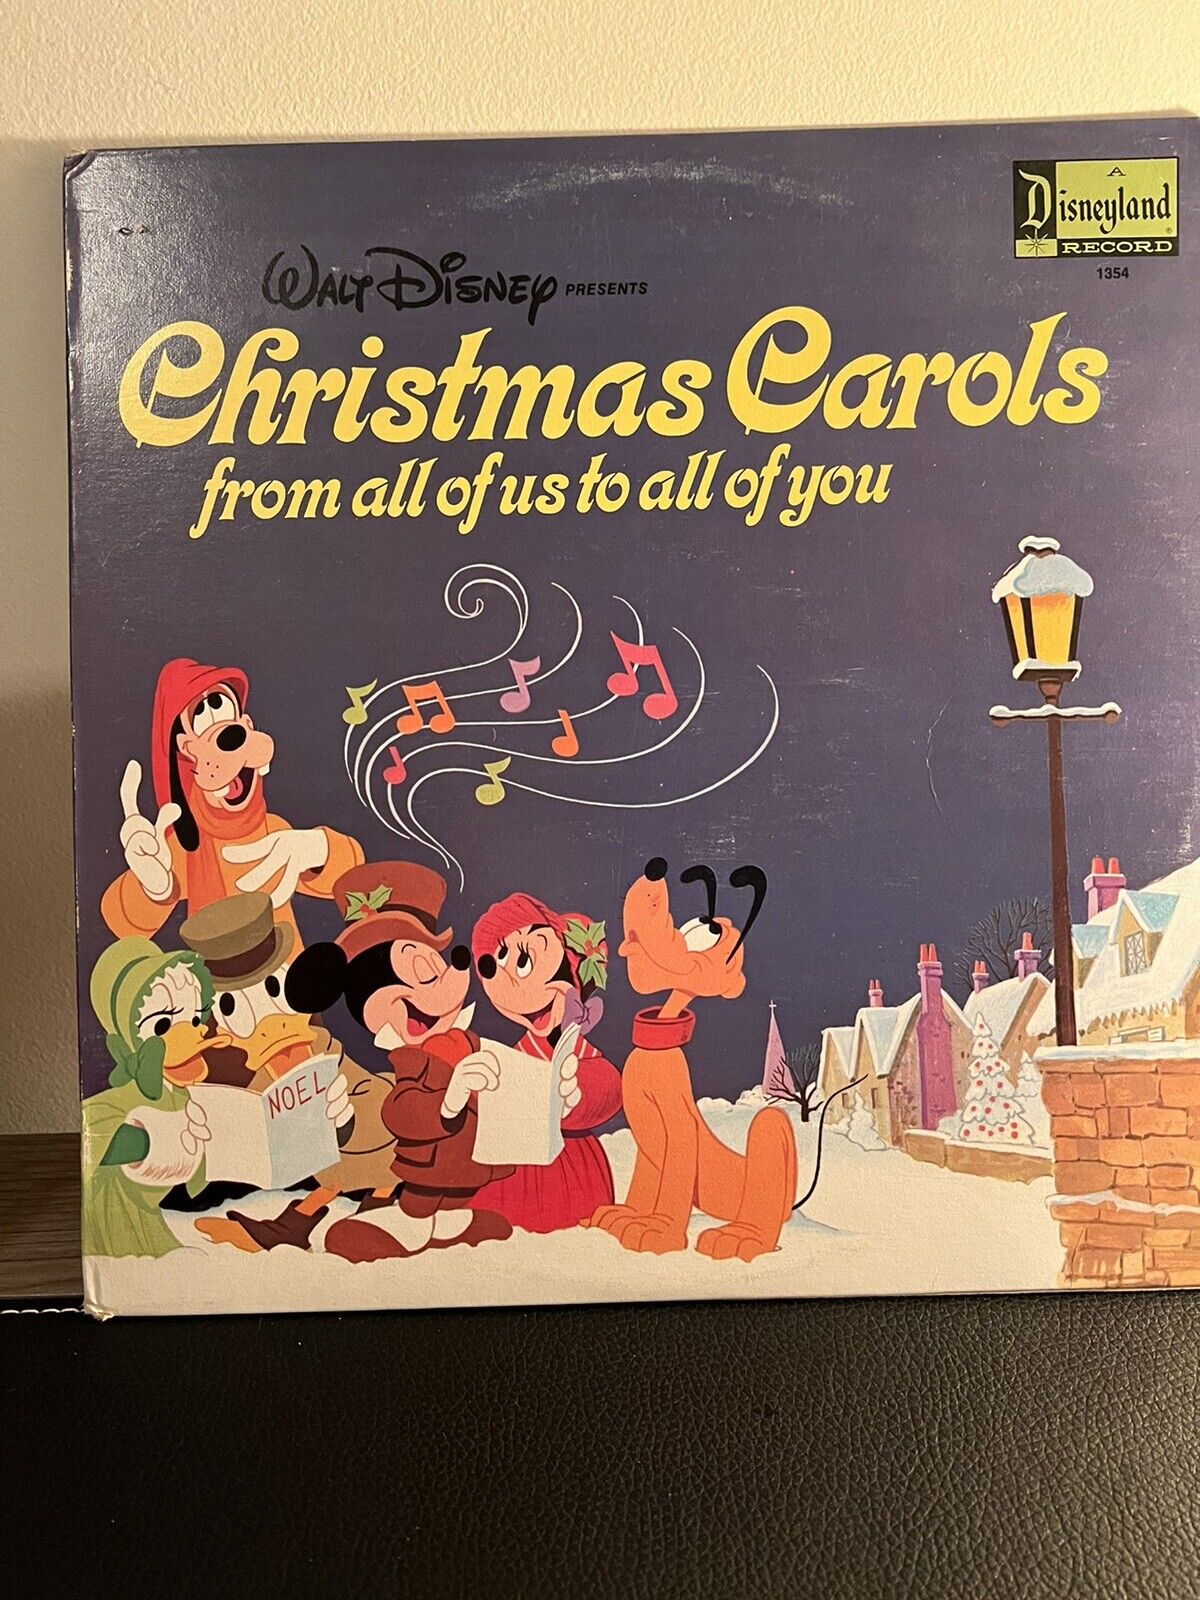 Disney Christmas Carols From All of Us to All of You Disneyland Record 1973 LP